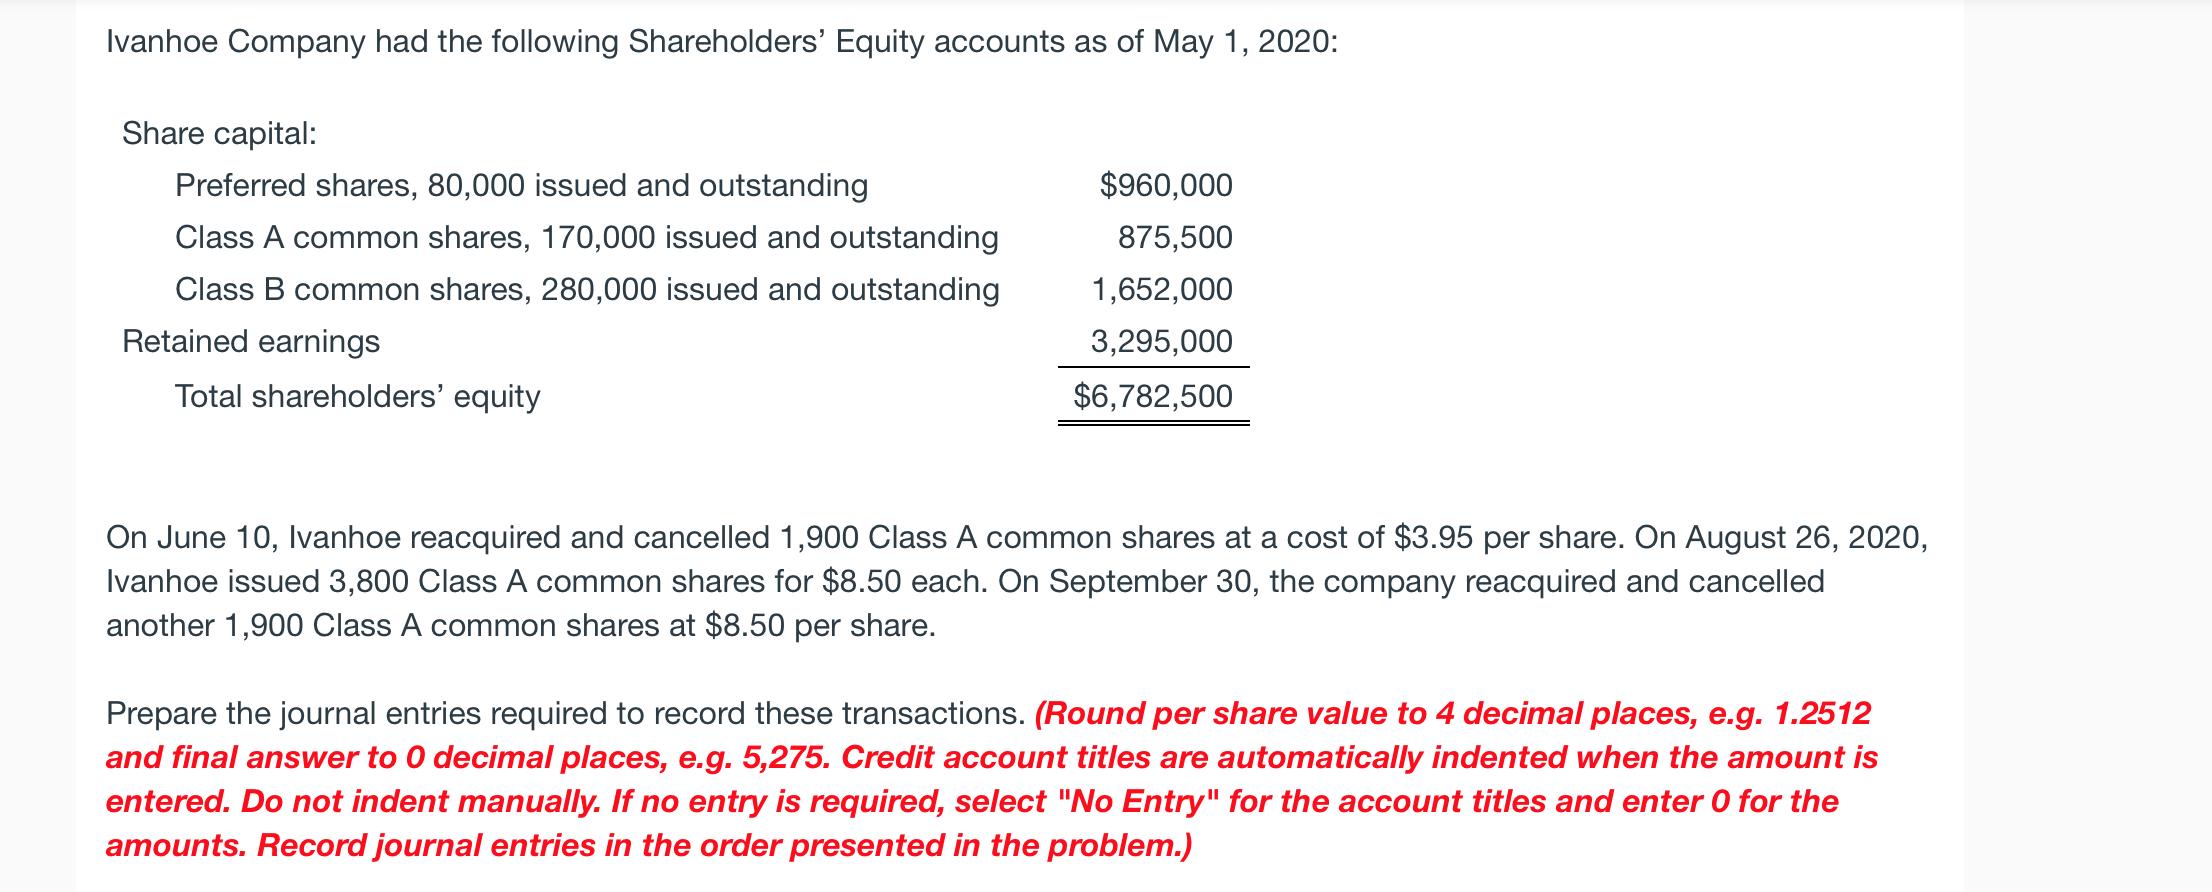 Ivanhoe Company had the following Shareholders Equity accounts as of May 1, 2020: Share capital: Preferred shares, 80,000 is